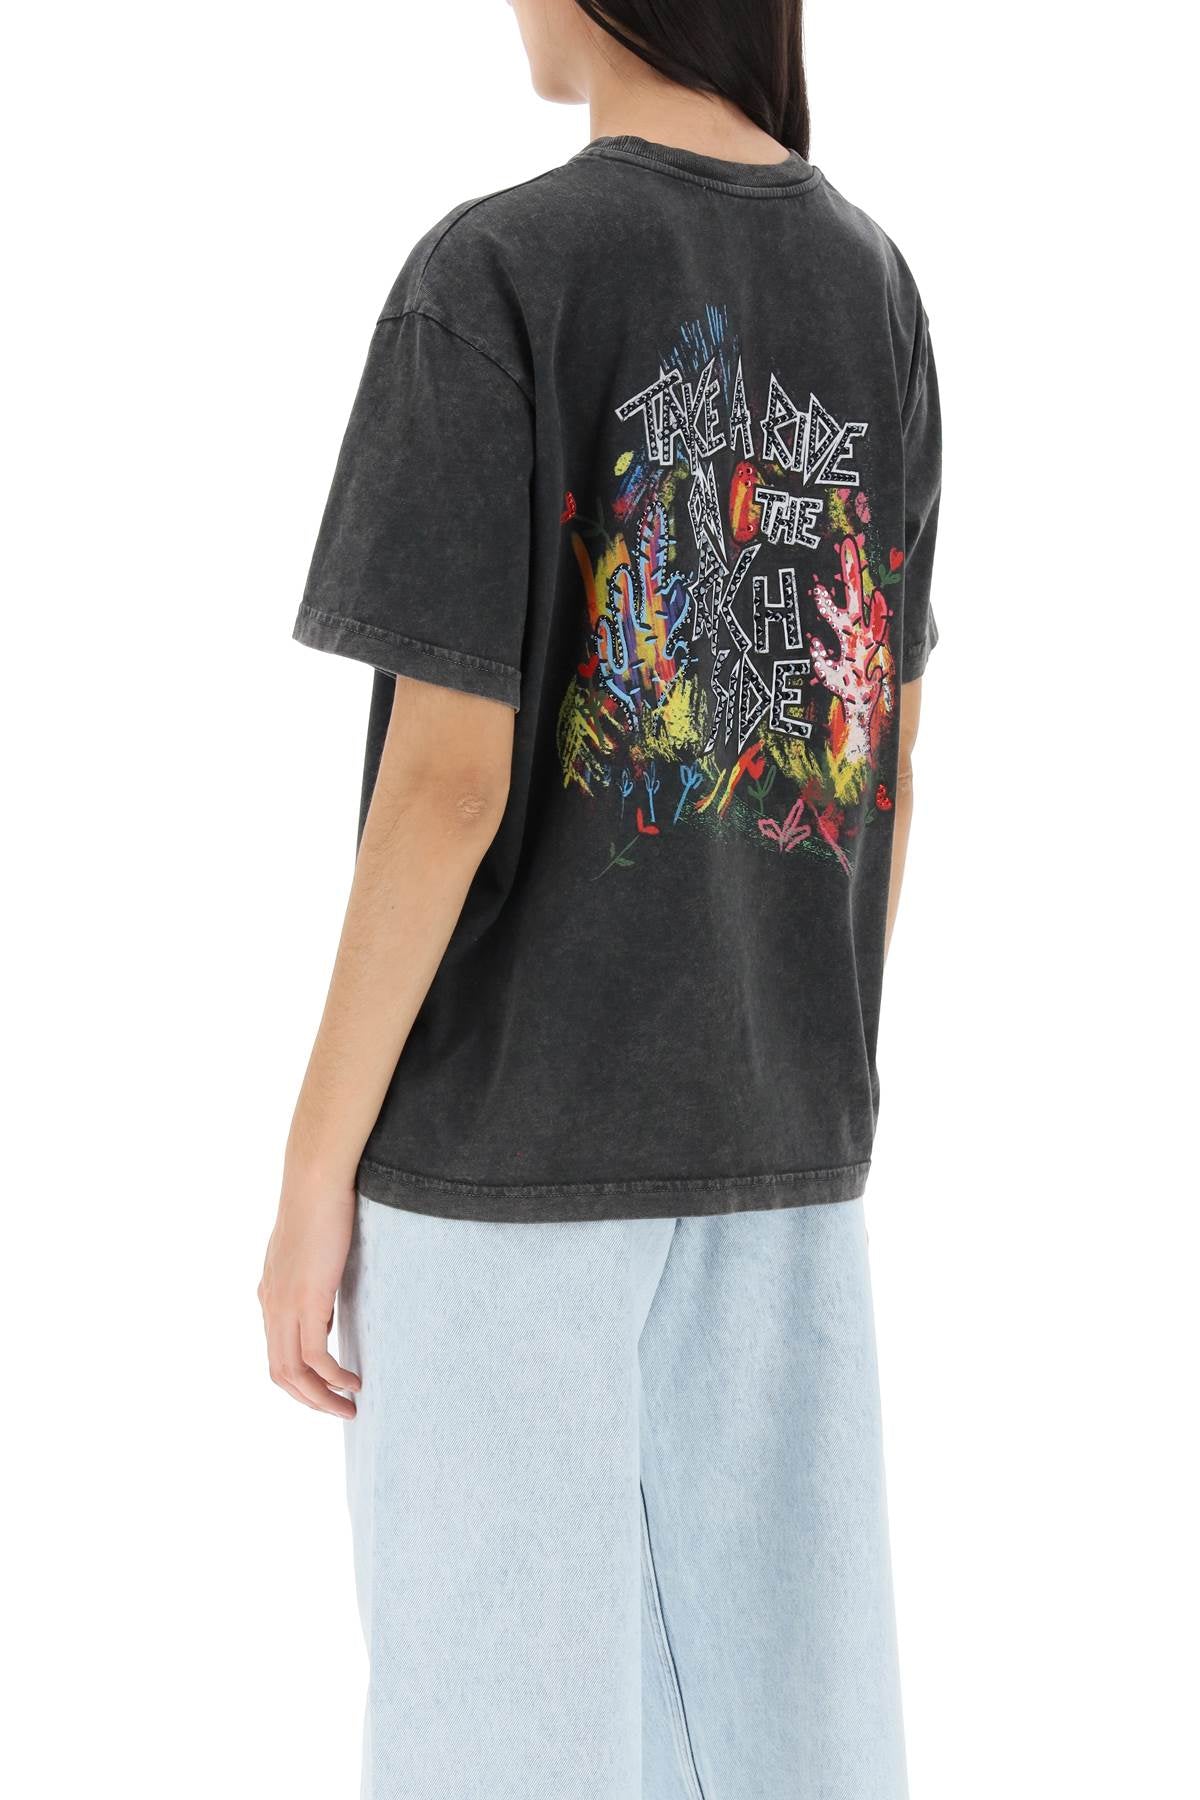 Alessandra rich oversized t-shirt with print and rhinestones-2